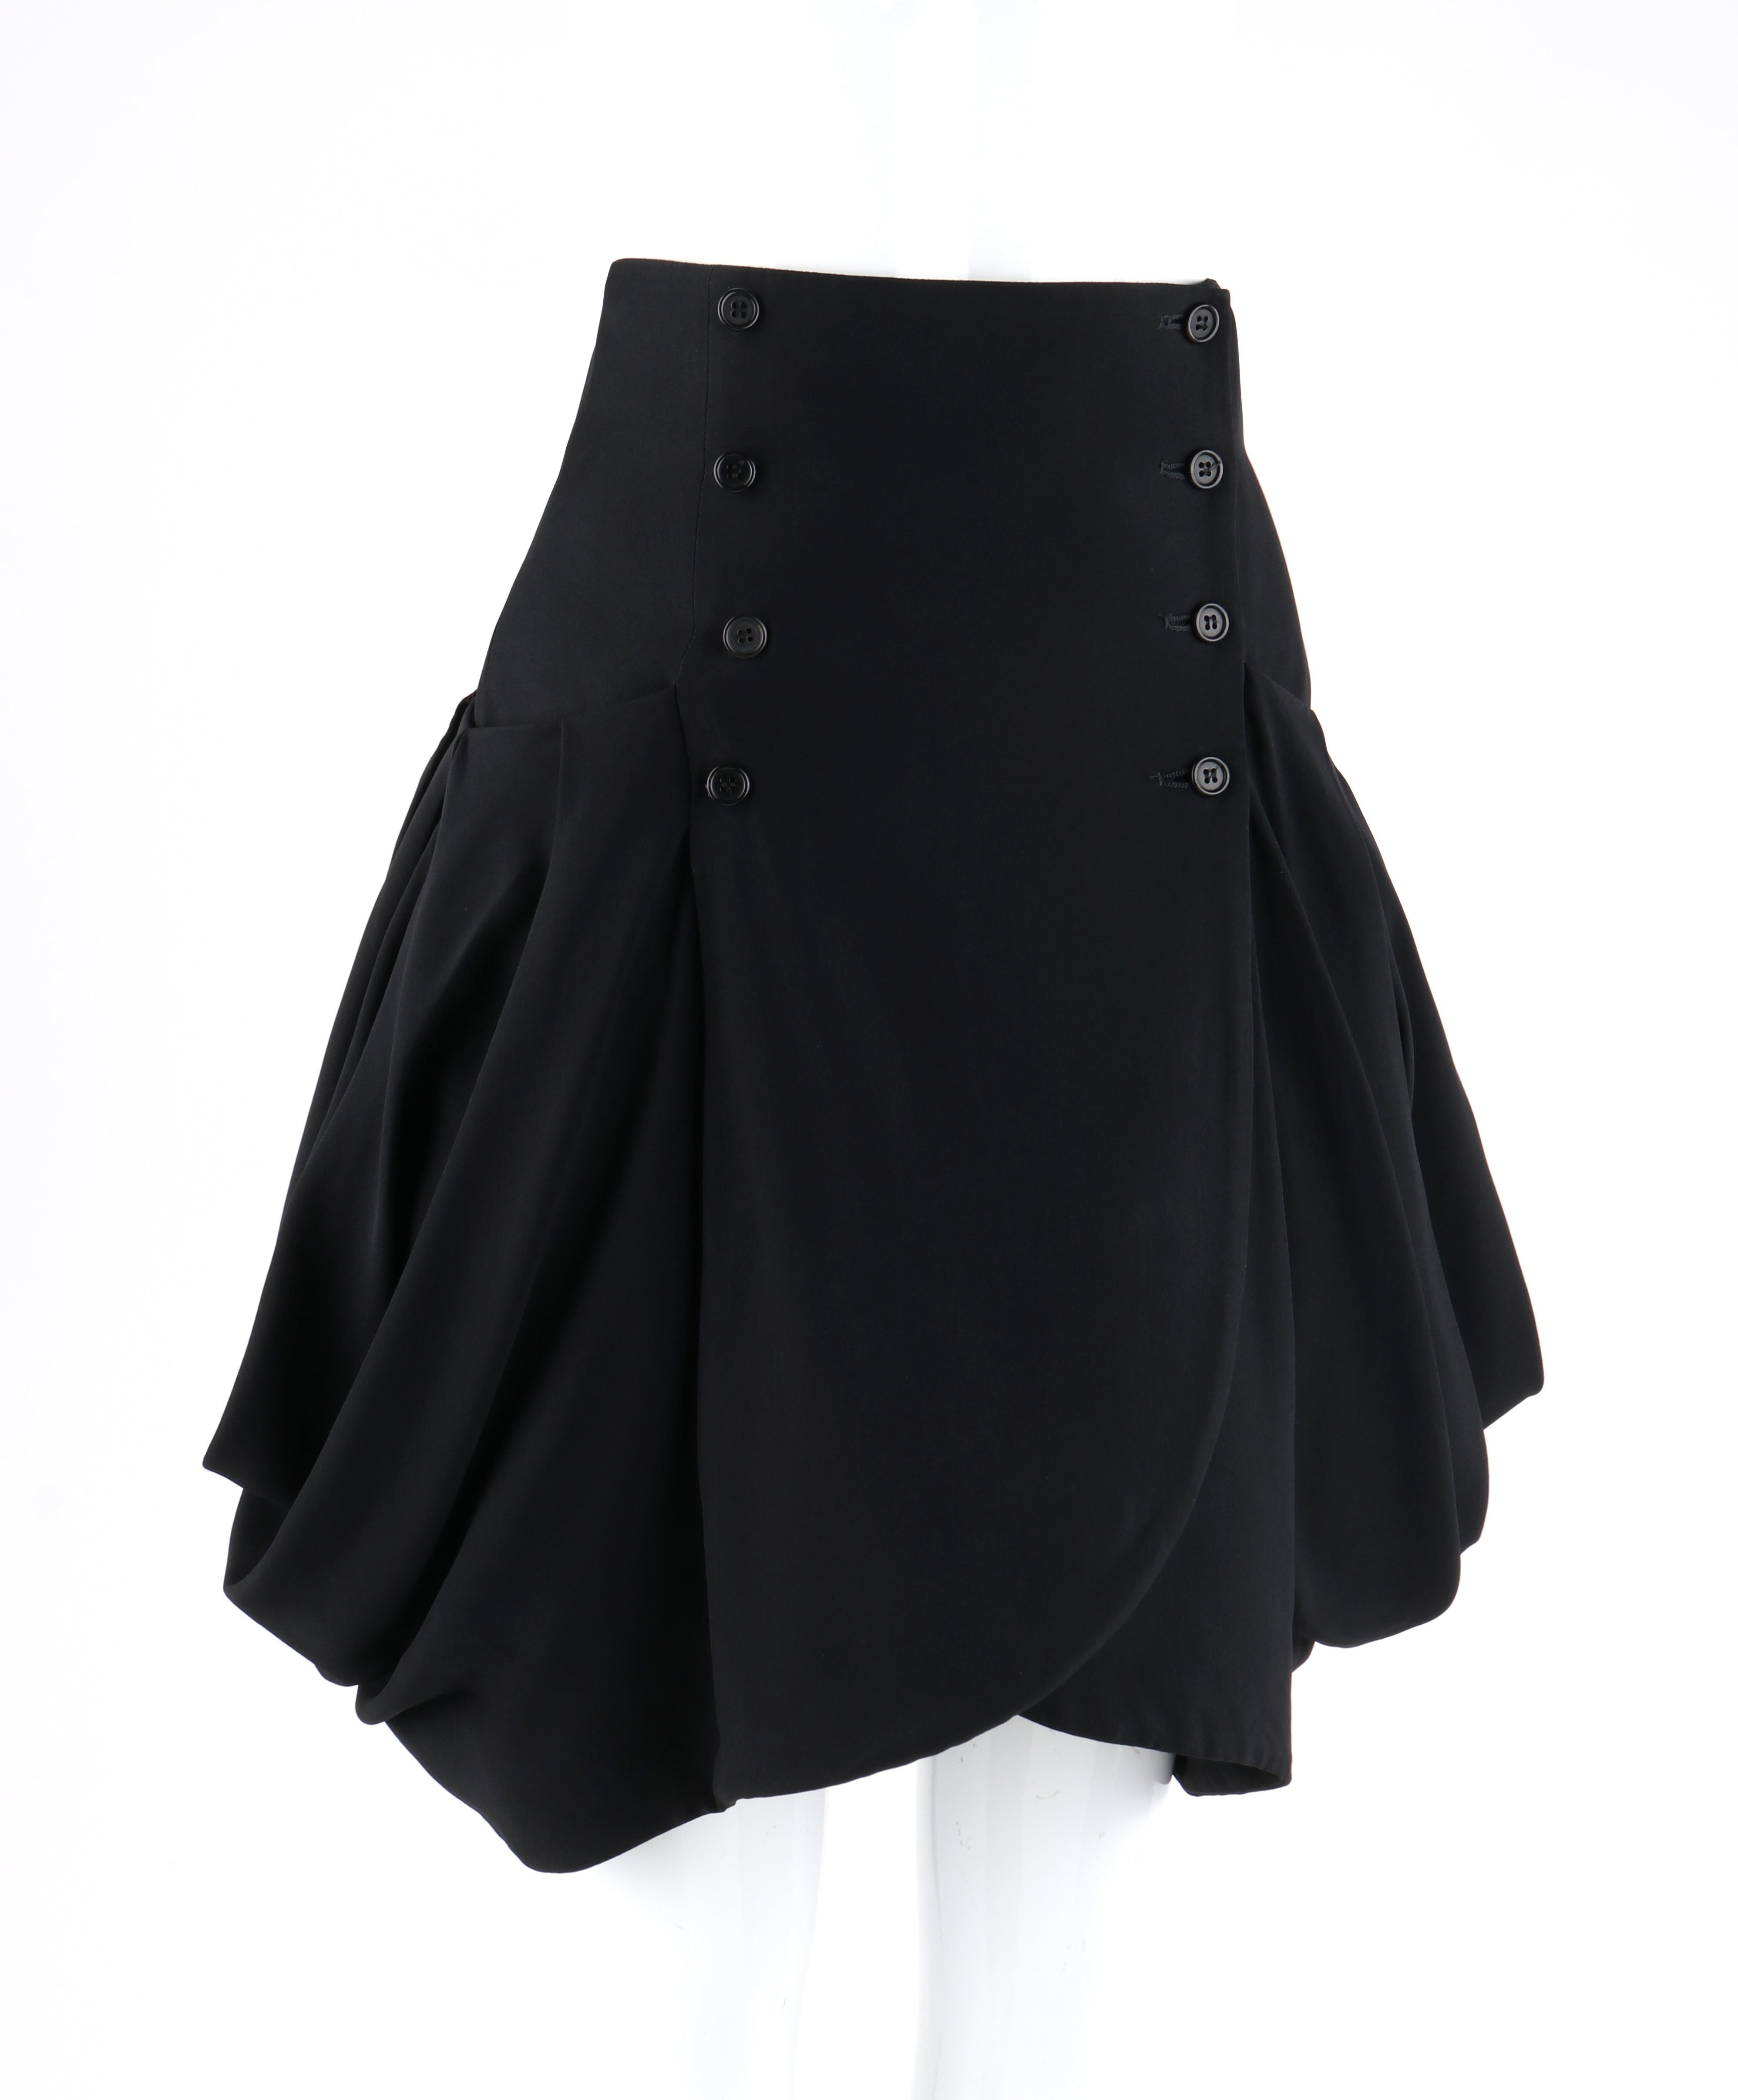 ALEXANDER McQUEEN c.2009 Black Double Button Front Box Pleat Pocket Flare Skirt 

Brand / Manufacturer: Alexander McQueen
Designer: Alexander McQueen
Collection: c.2009
Style: Flare Skirt
Color(s): Black
Lined: Yes
Marked Fabric Content: 50%